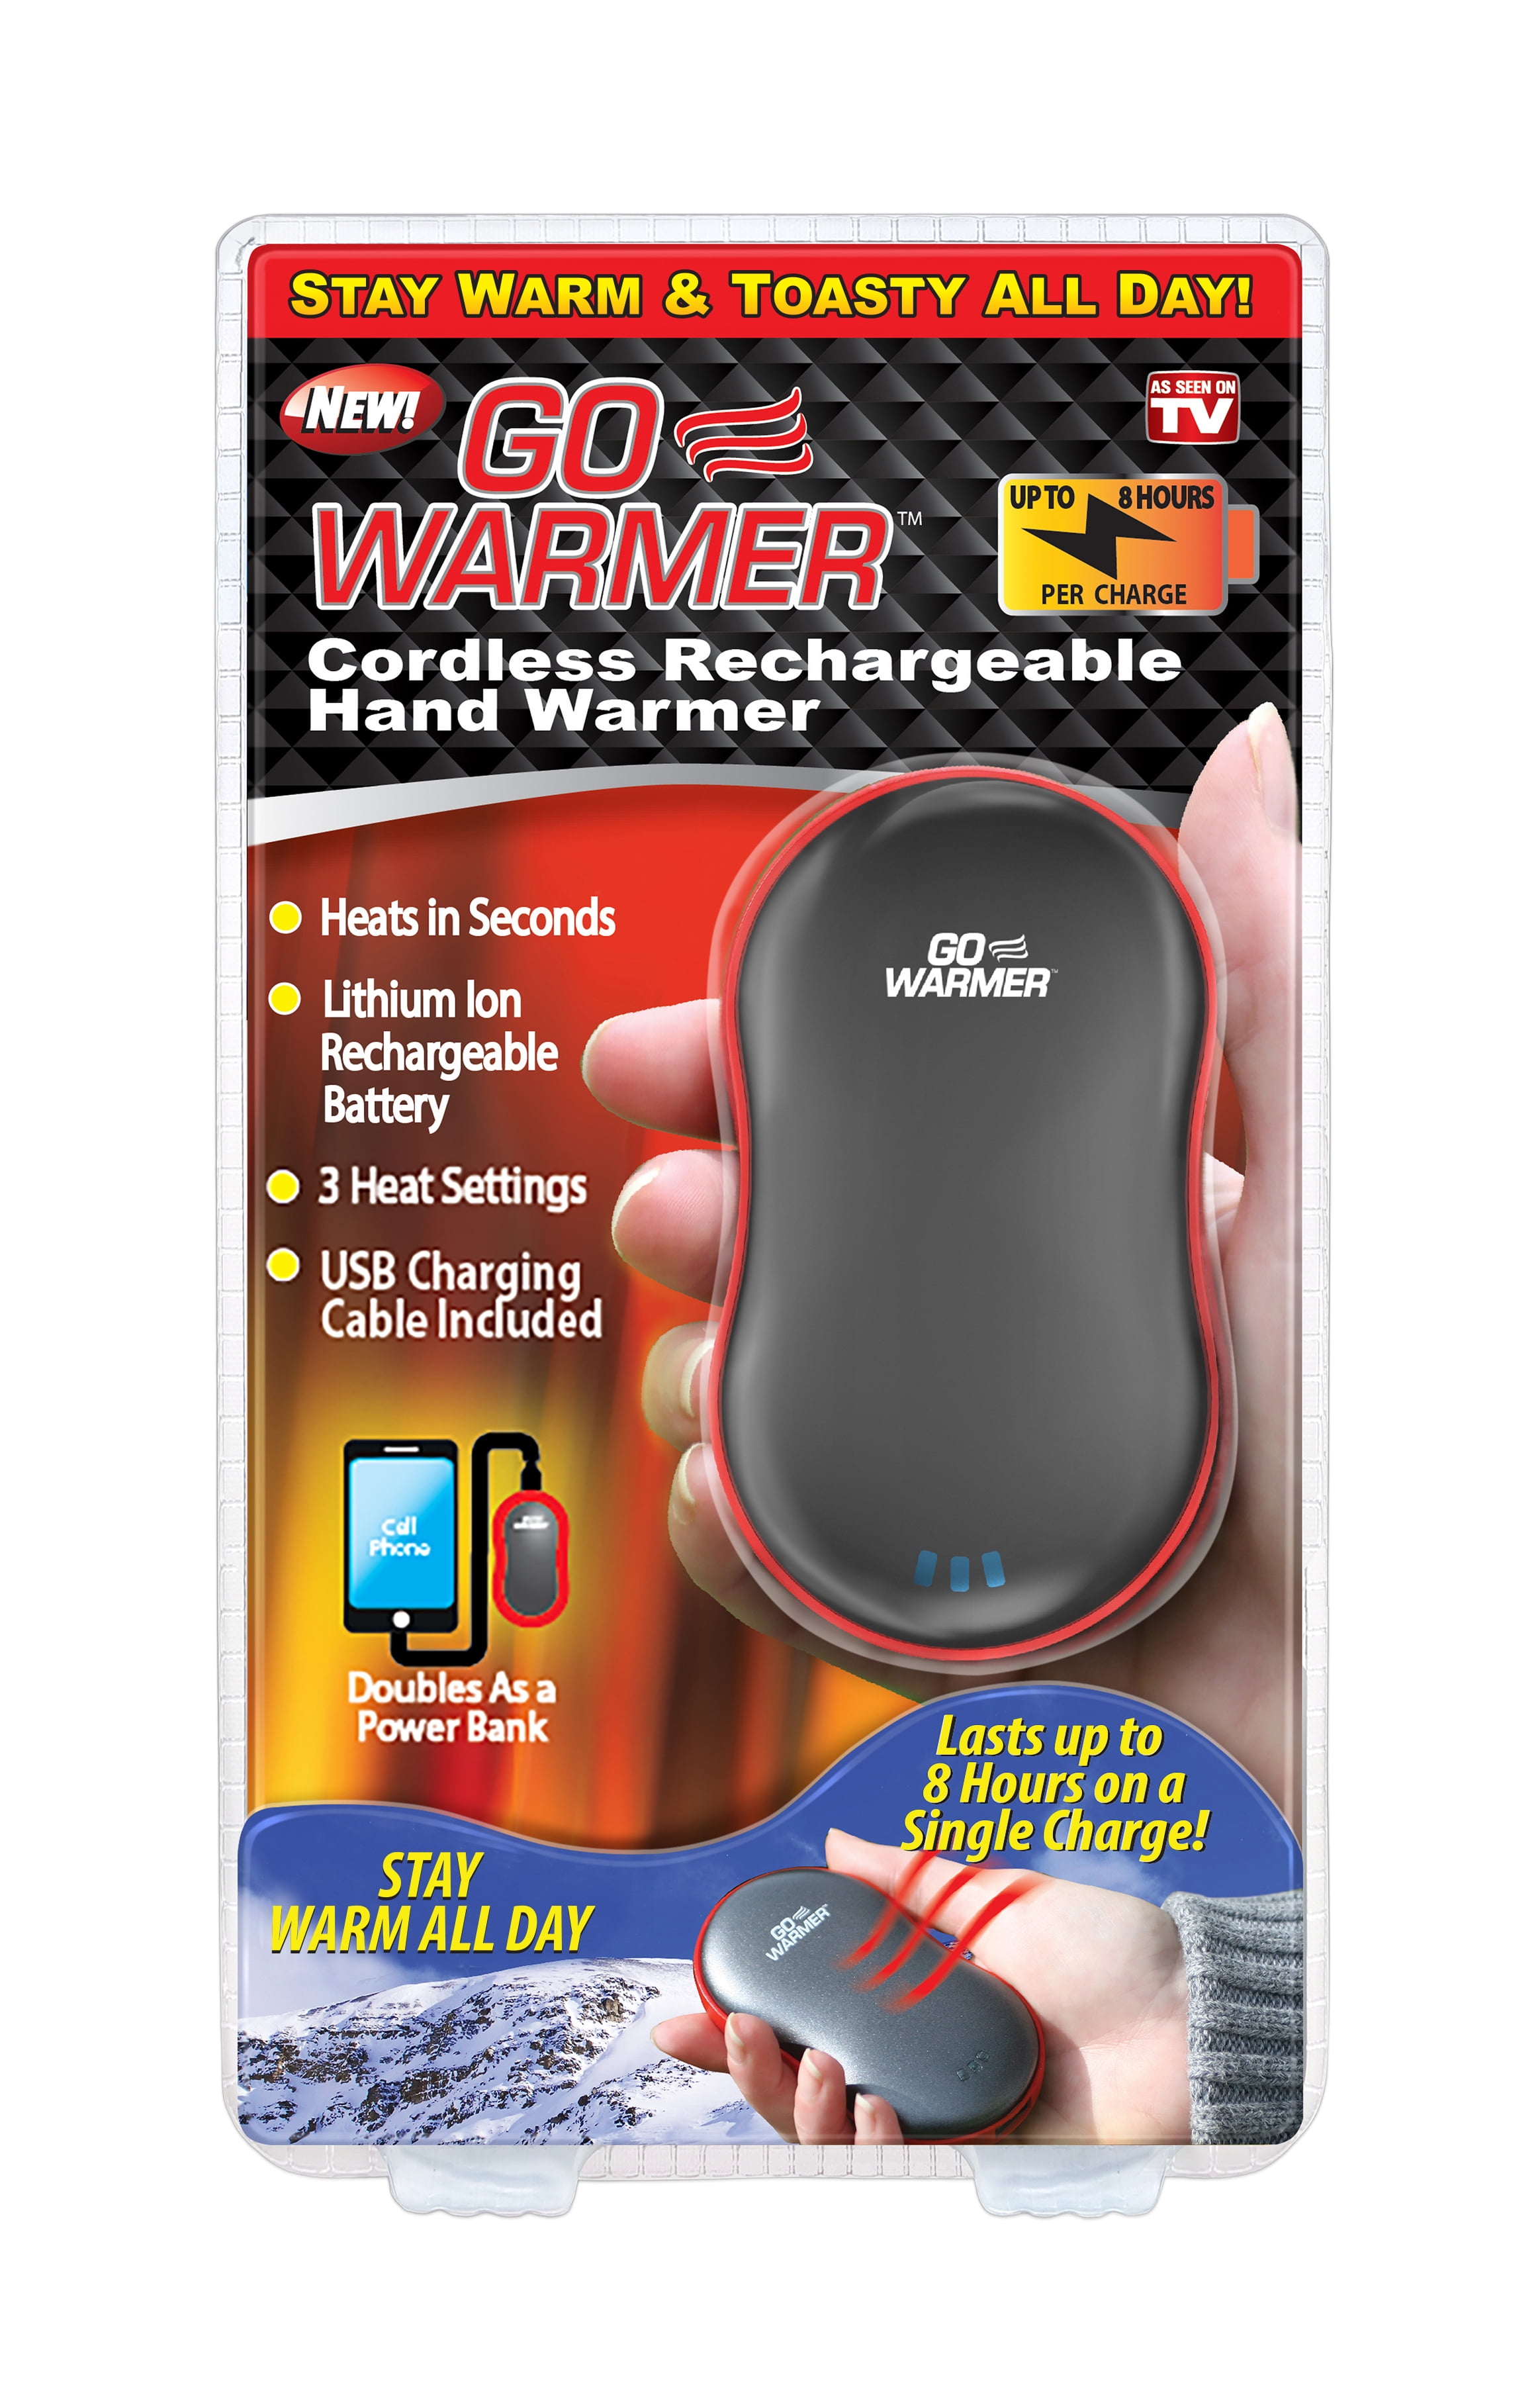 Travel and Work Low Medium High Temperature for Camping Go Warmer Rechargeable Hand Warmers Power Bank Portable Charger USB 